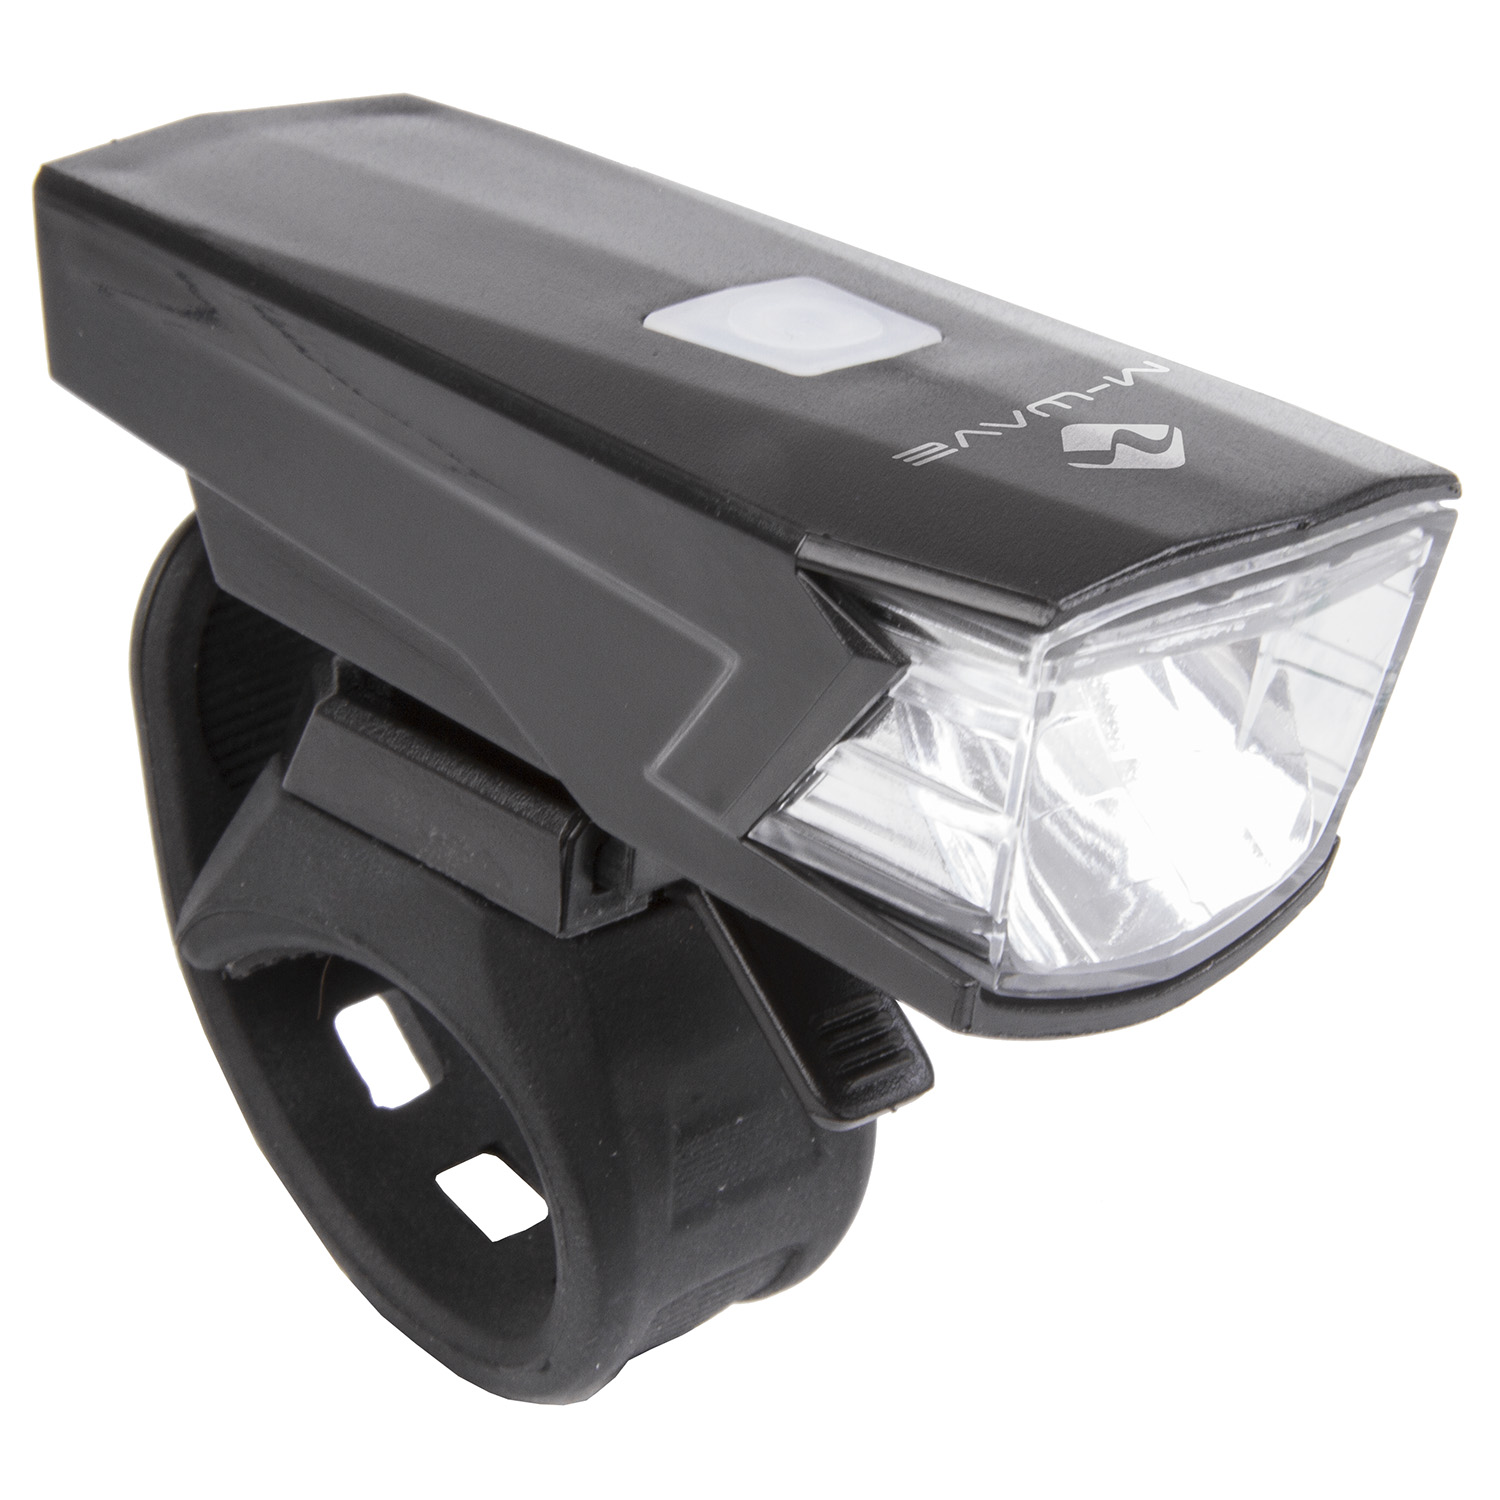 220404 – M-WAVE Apollon K 30 USB battery pack head lamp – AVAILABLE IN SELECTED BIKE SHOPS